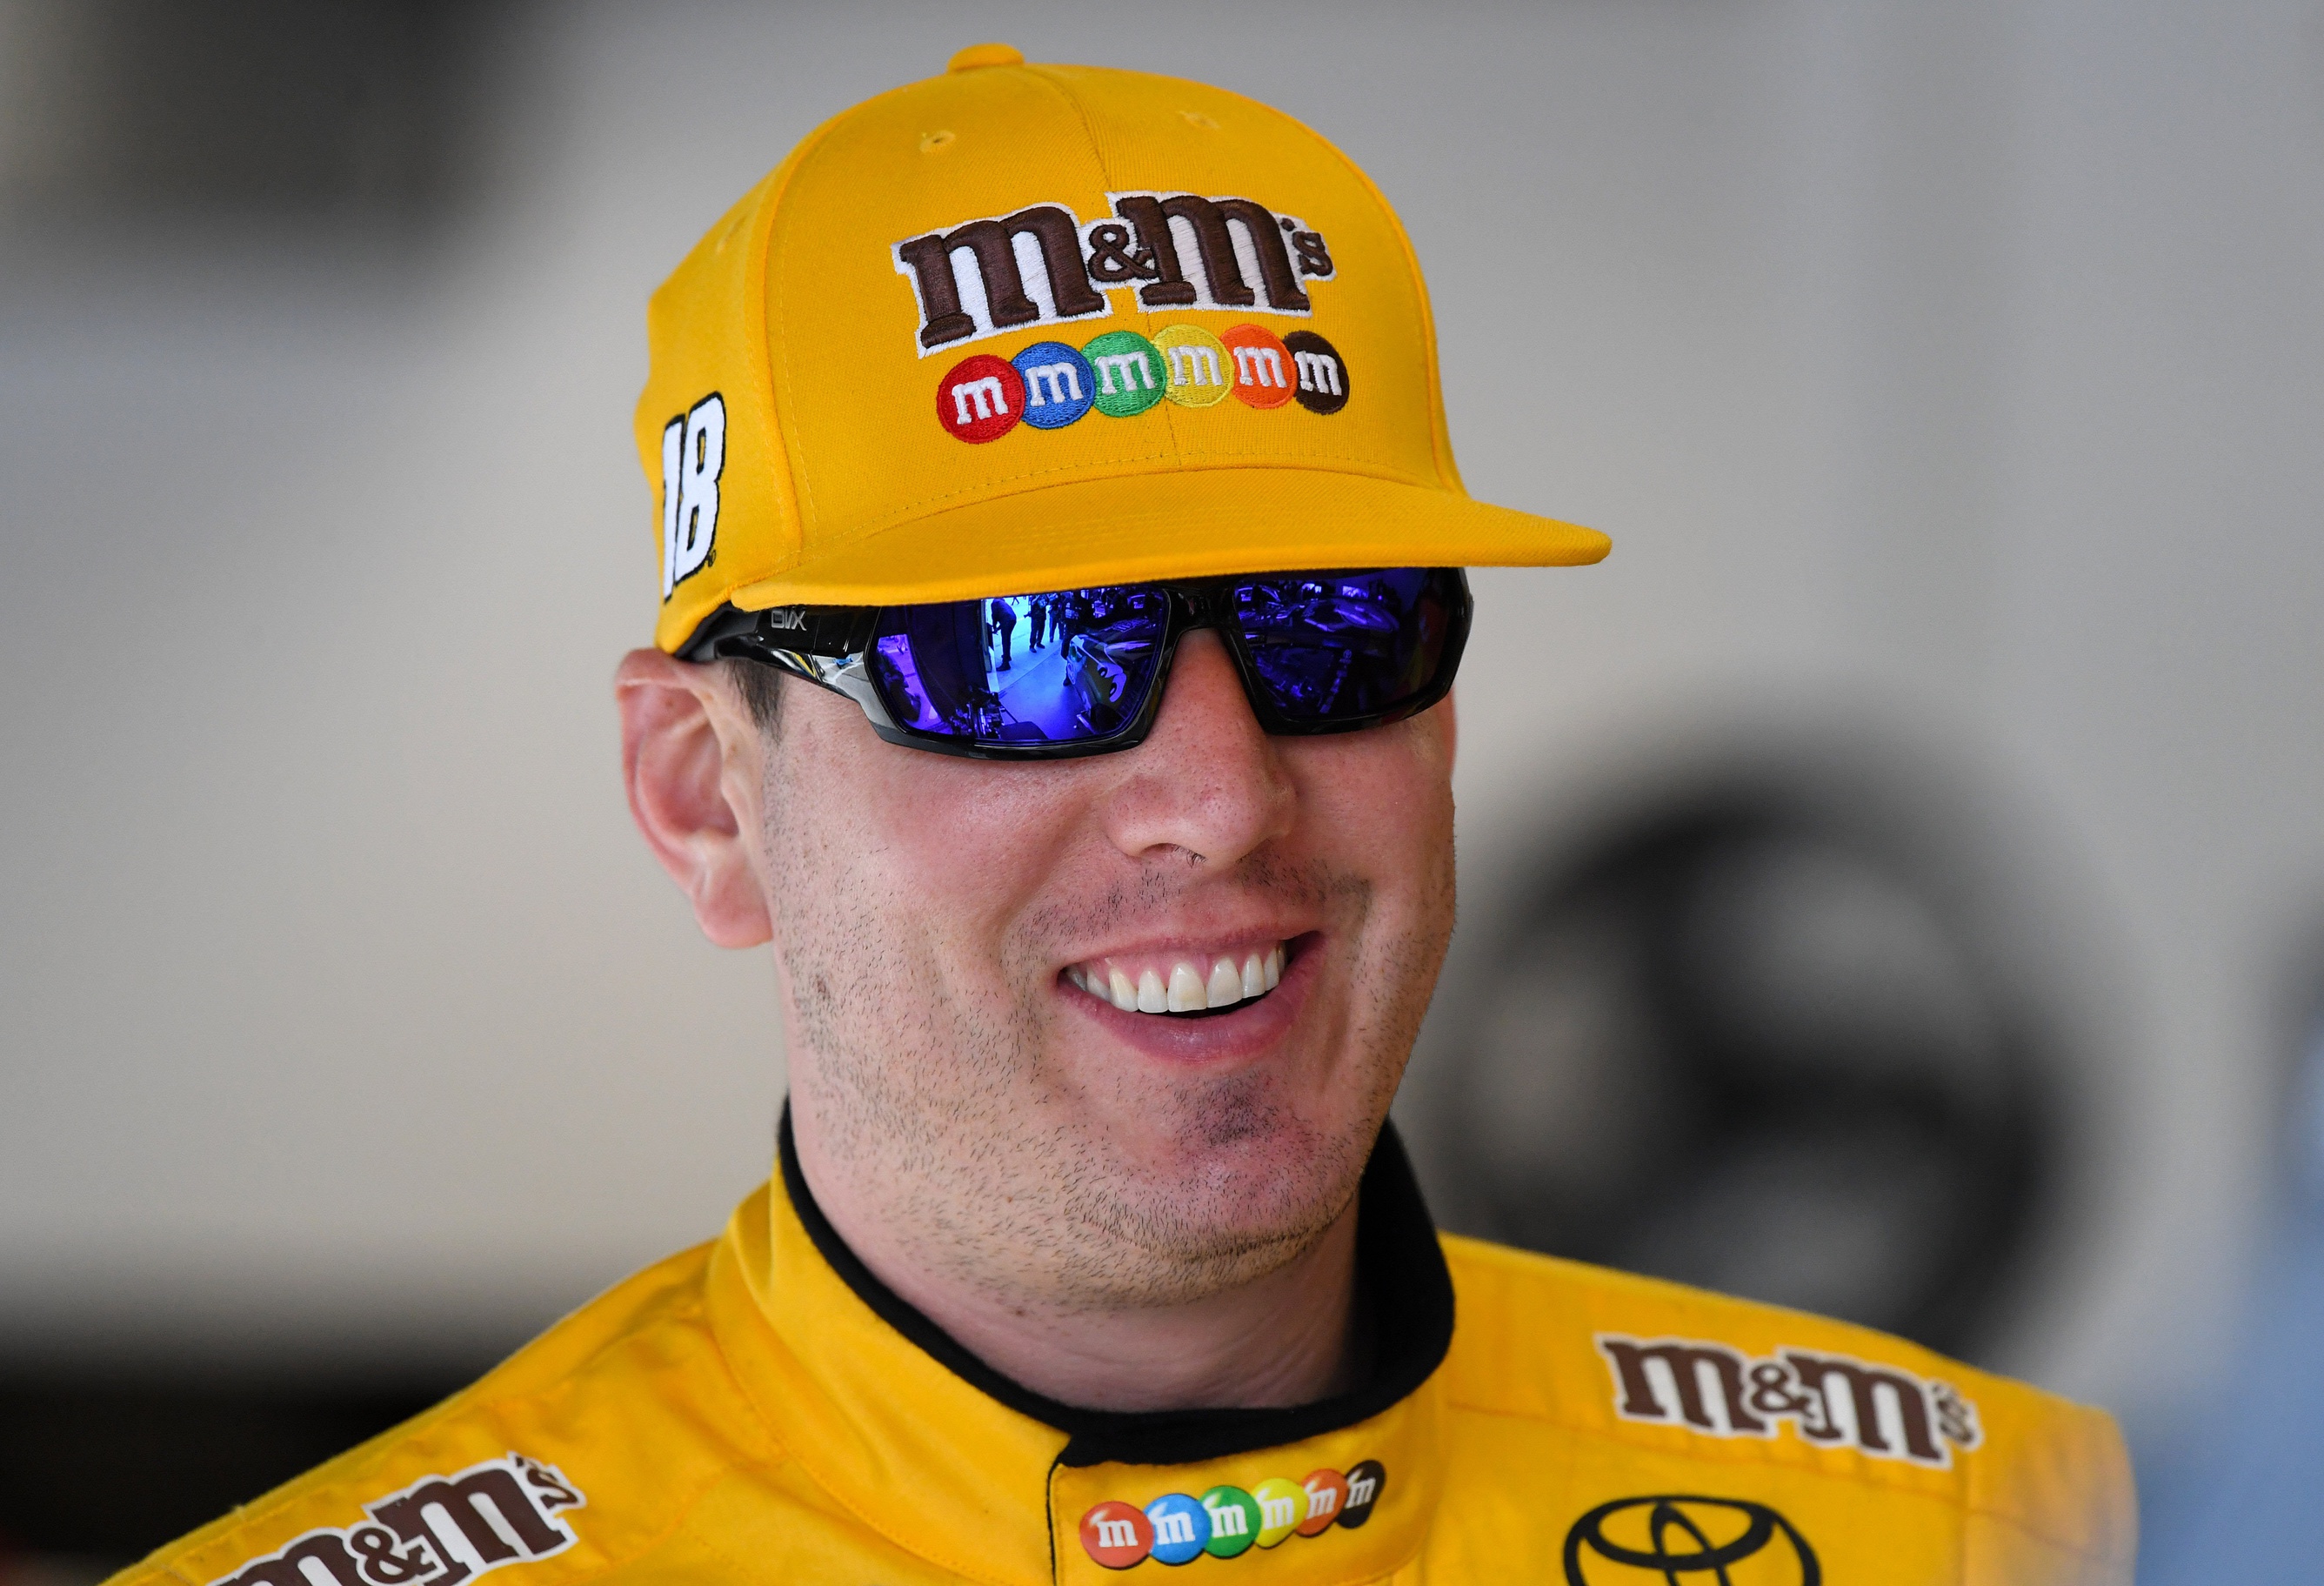 WATCH: Kyle Busch made a real-life Mario Kart course for his kids